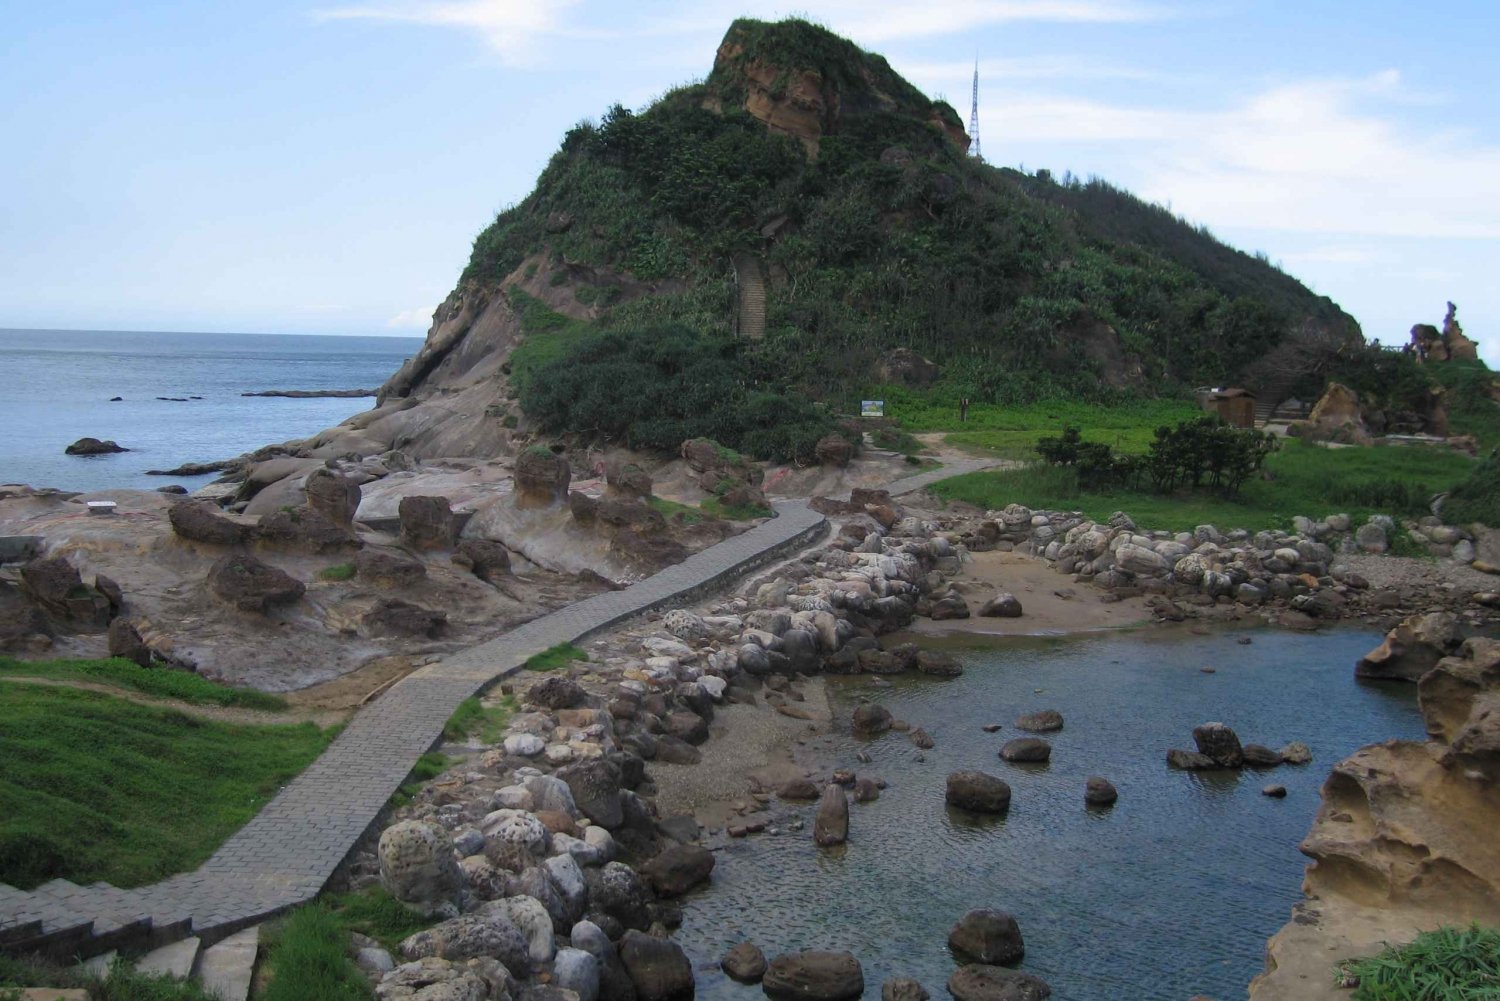 From Taipei: Yehliu Geopark and Keelung Harbor Guided Tour